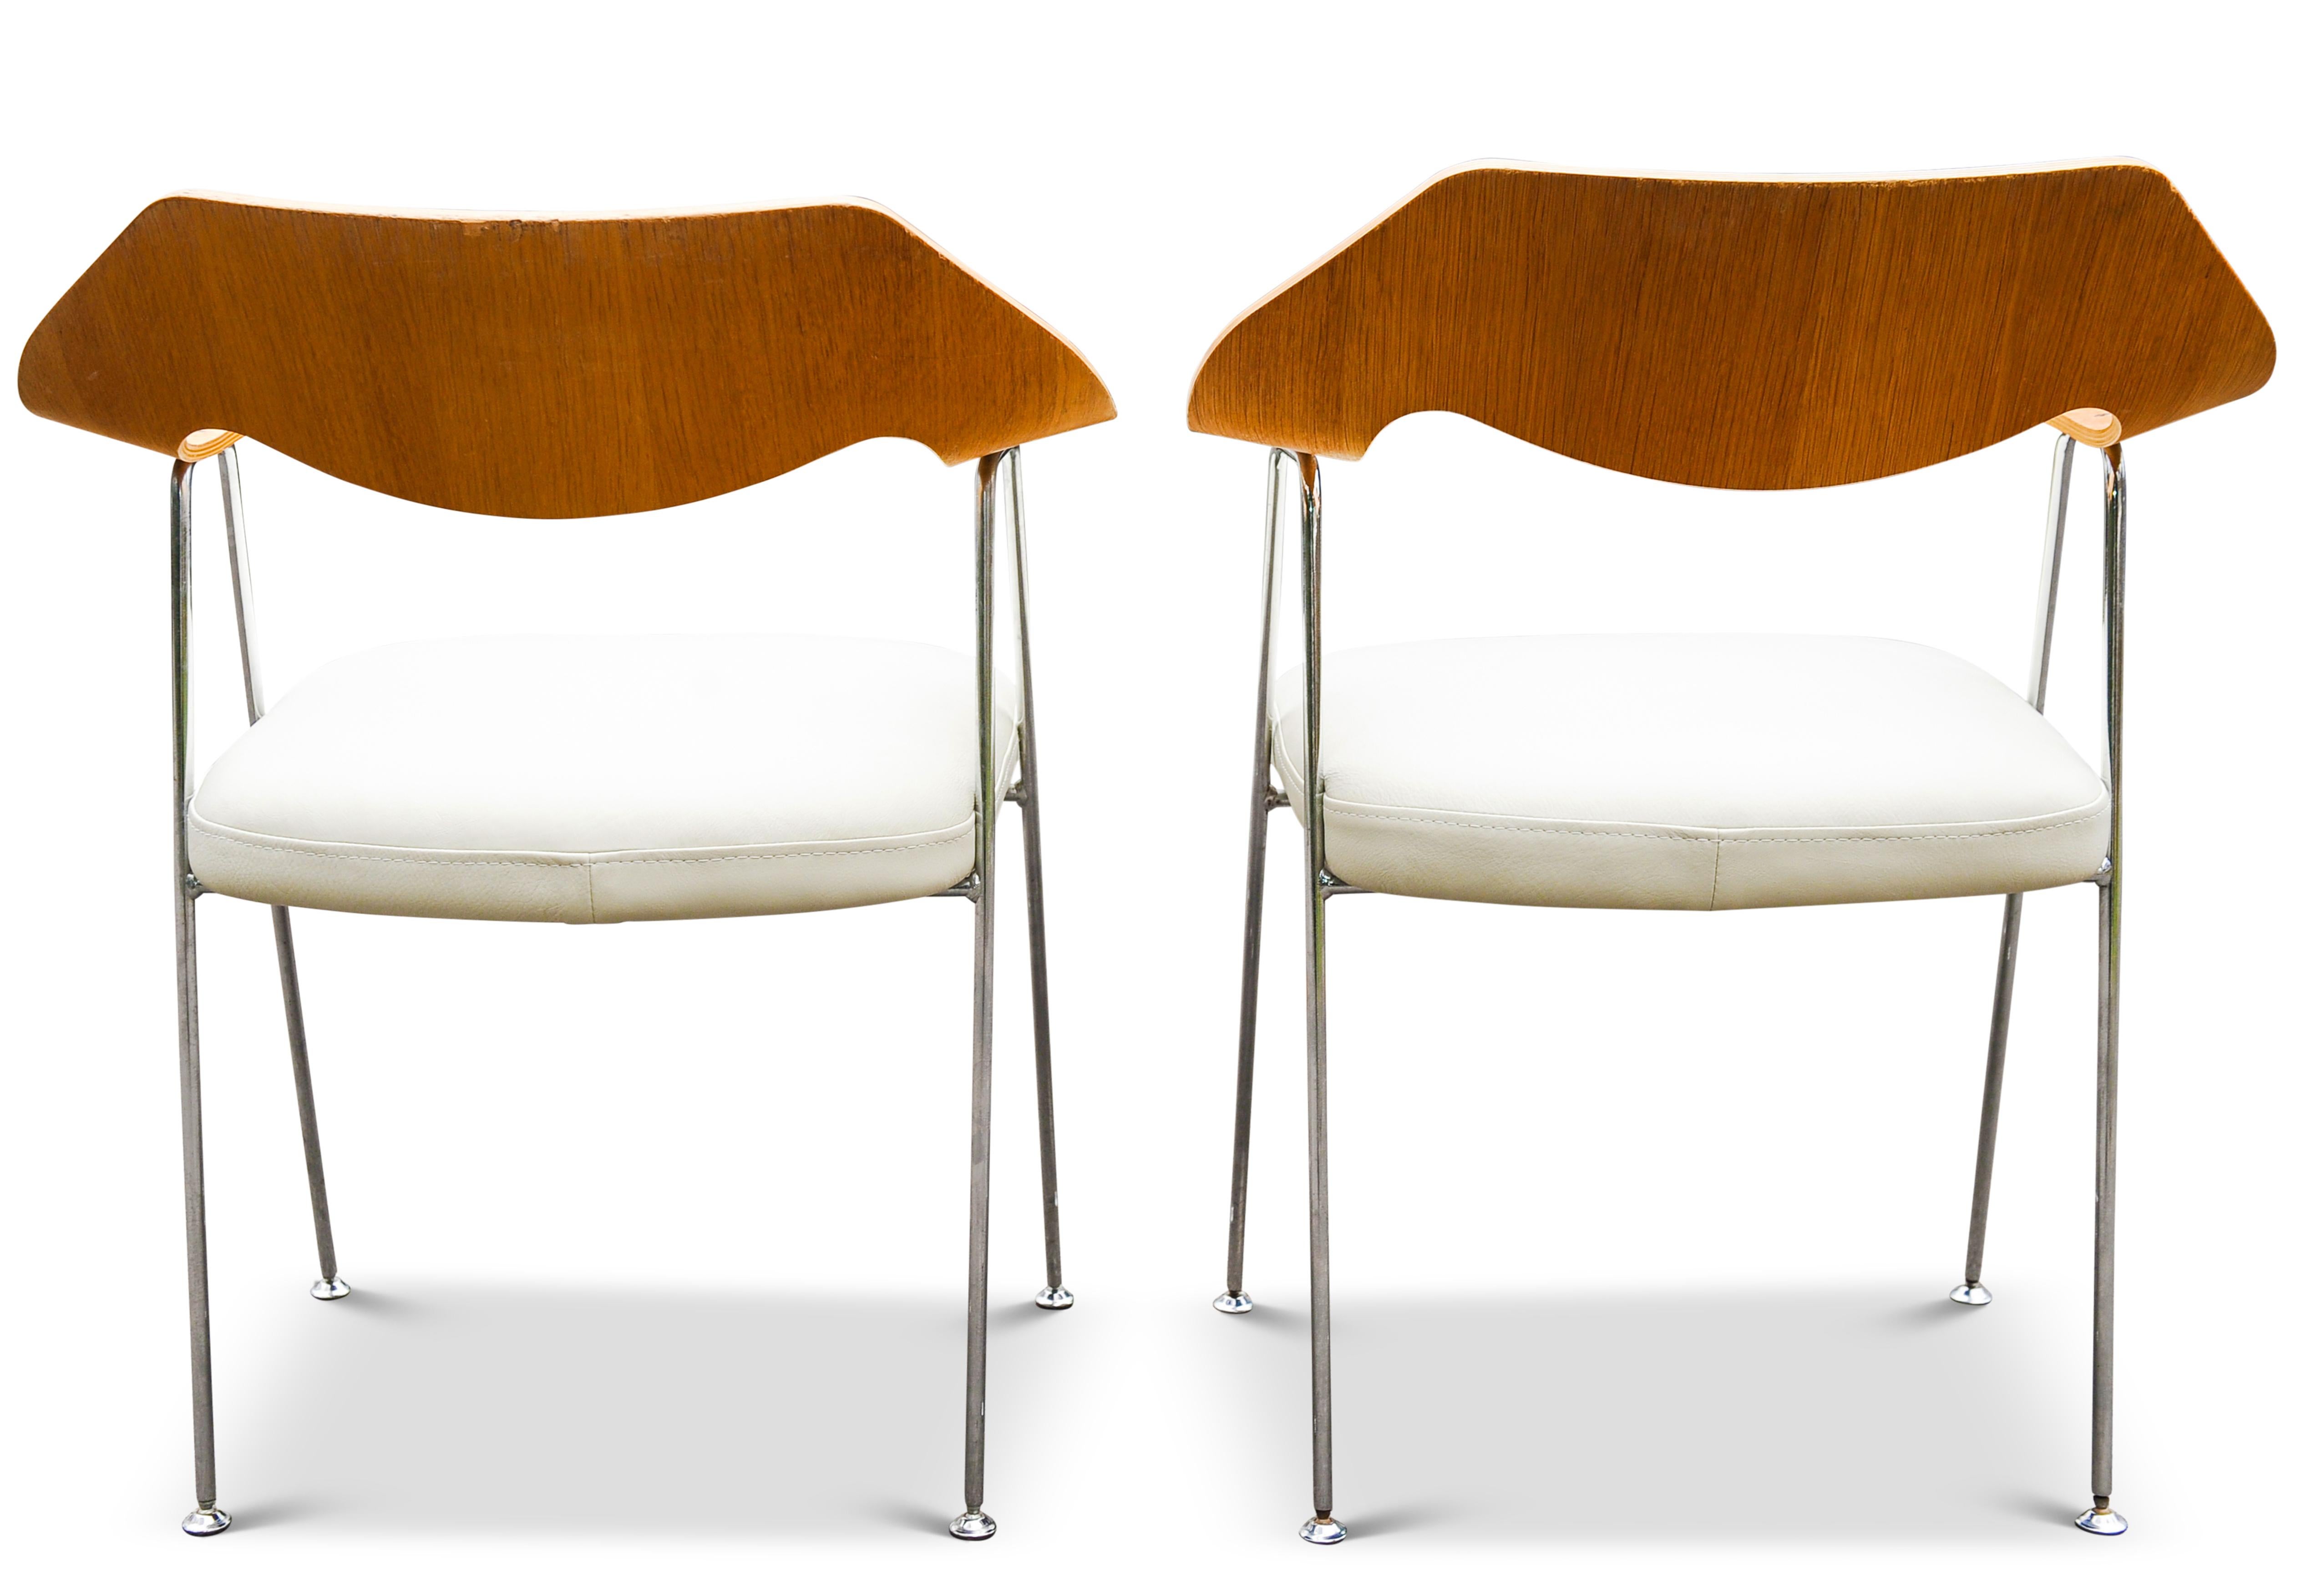 20th Century Pair of Robin Day Hille Chair Bent Oak Plywood & Chrome with White Leather Seats For Sale